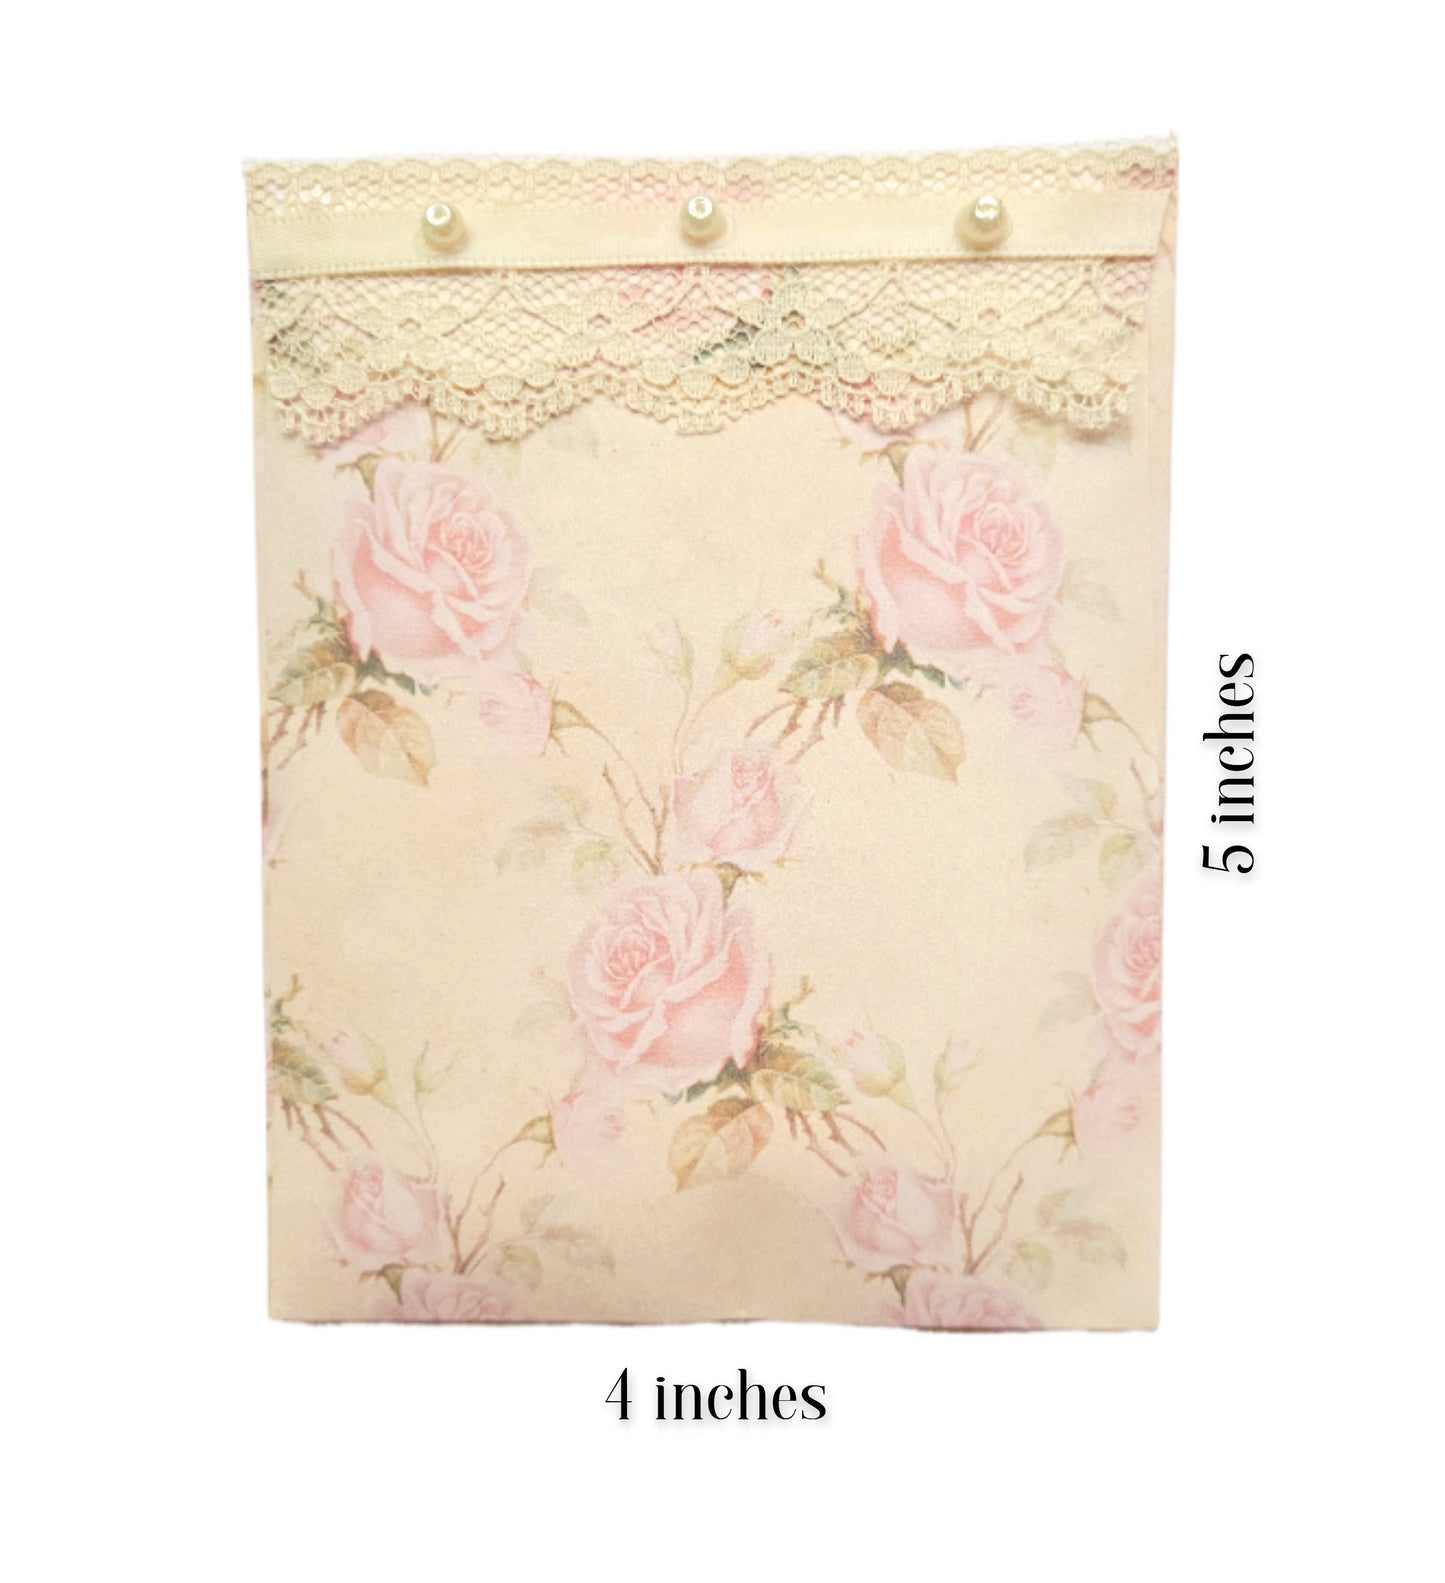 Pearls & Lace Rose Petal Scented Drawer, Closet & Car Sachets, Large Size 4" x 5", 3-Pack